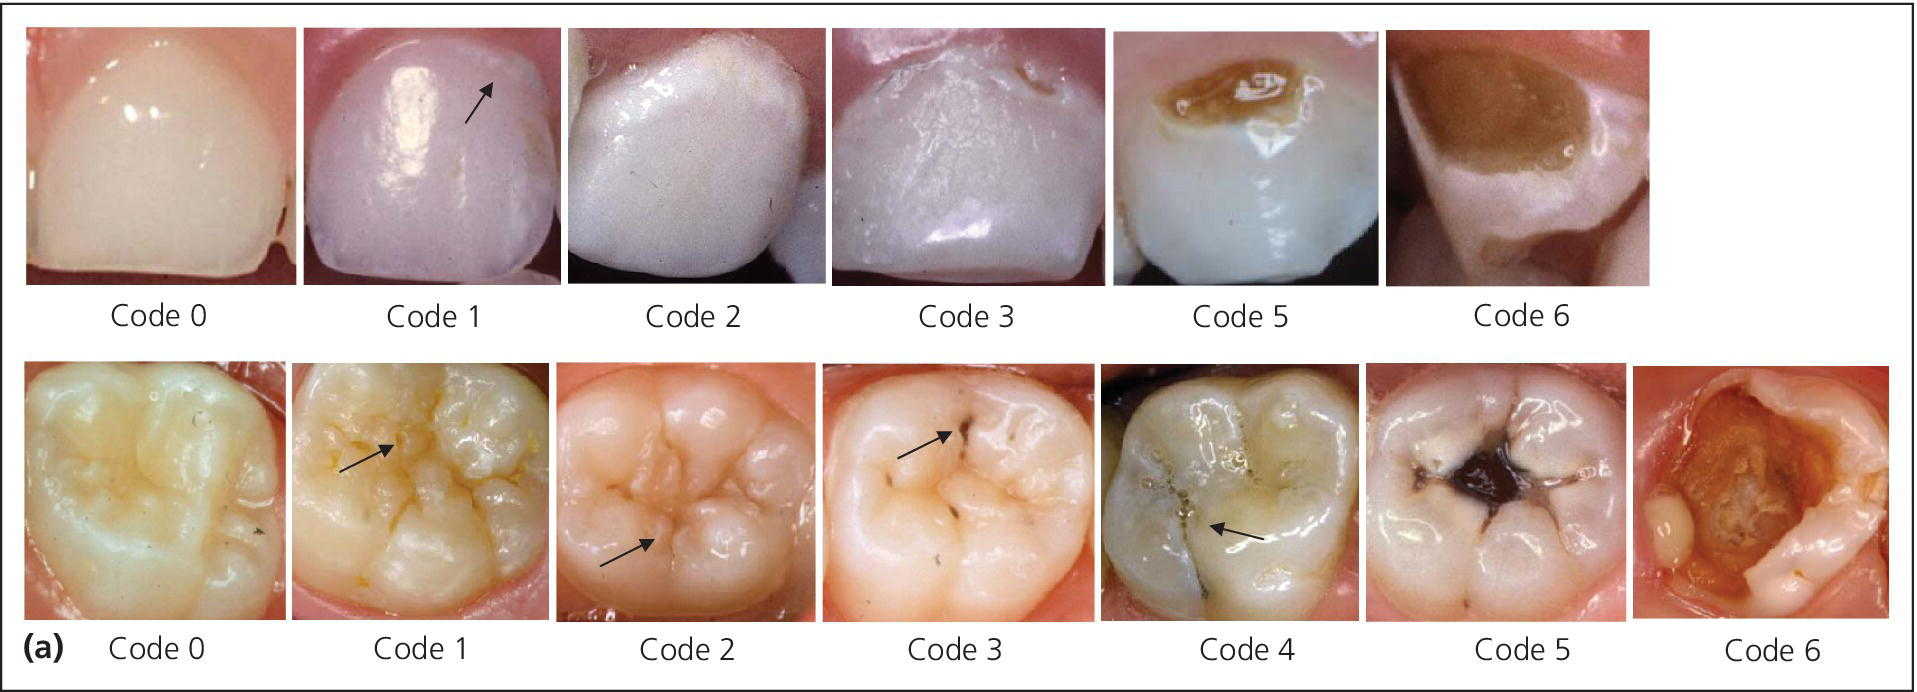 Two sets of photos of the teeth, depicting the ICDAS-based criteria for severity grading of caries on free smooth and occlusal tooth surfaces.